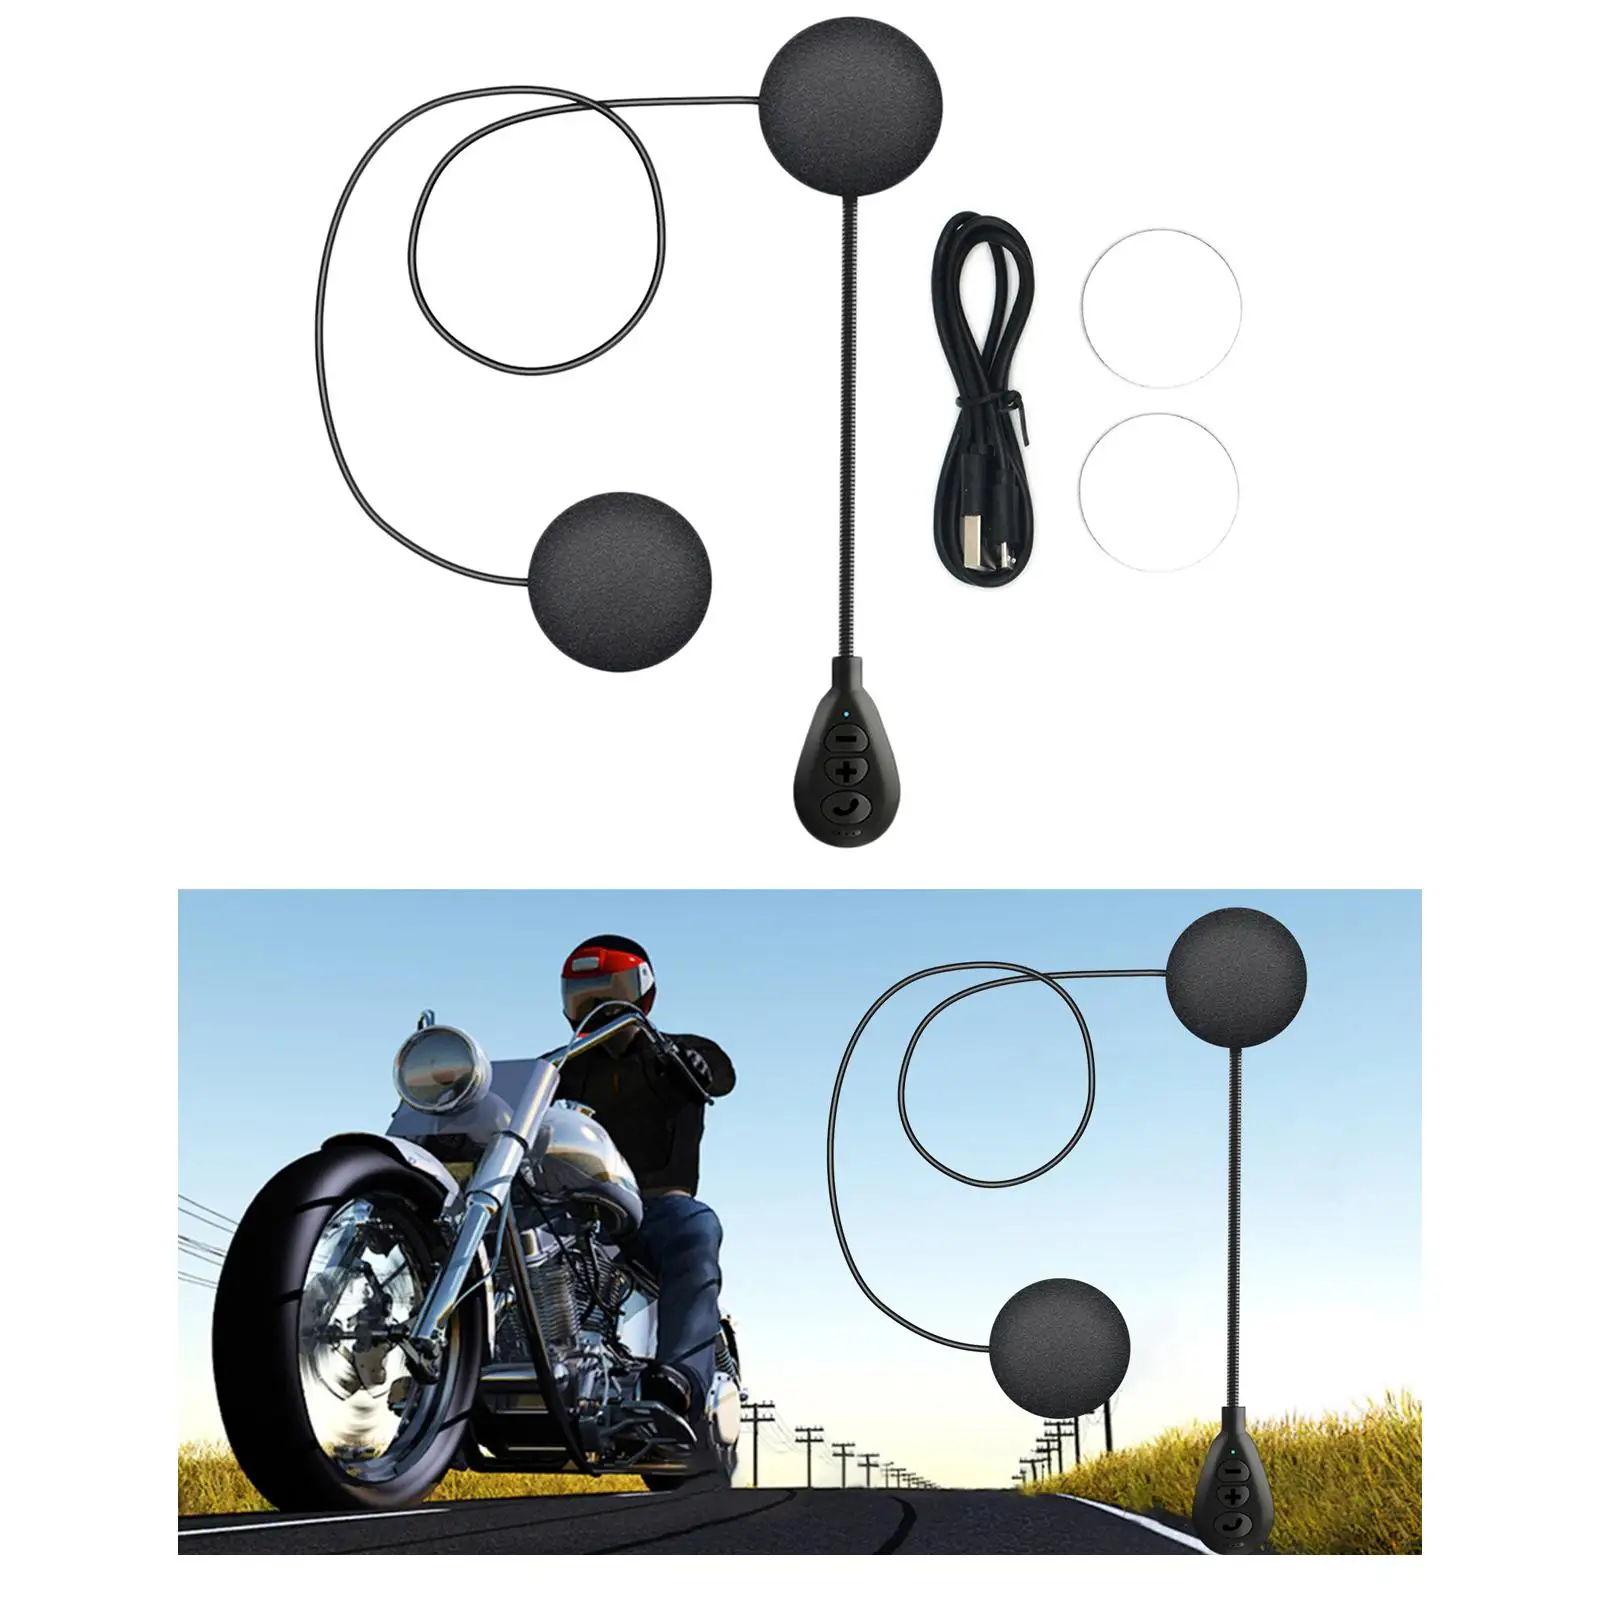 Motorcycle Bluetooth Helmet Headset Easy Set up Volume Control Noise Cancelling Stereo 180mAh Battery Earphone for Riding